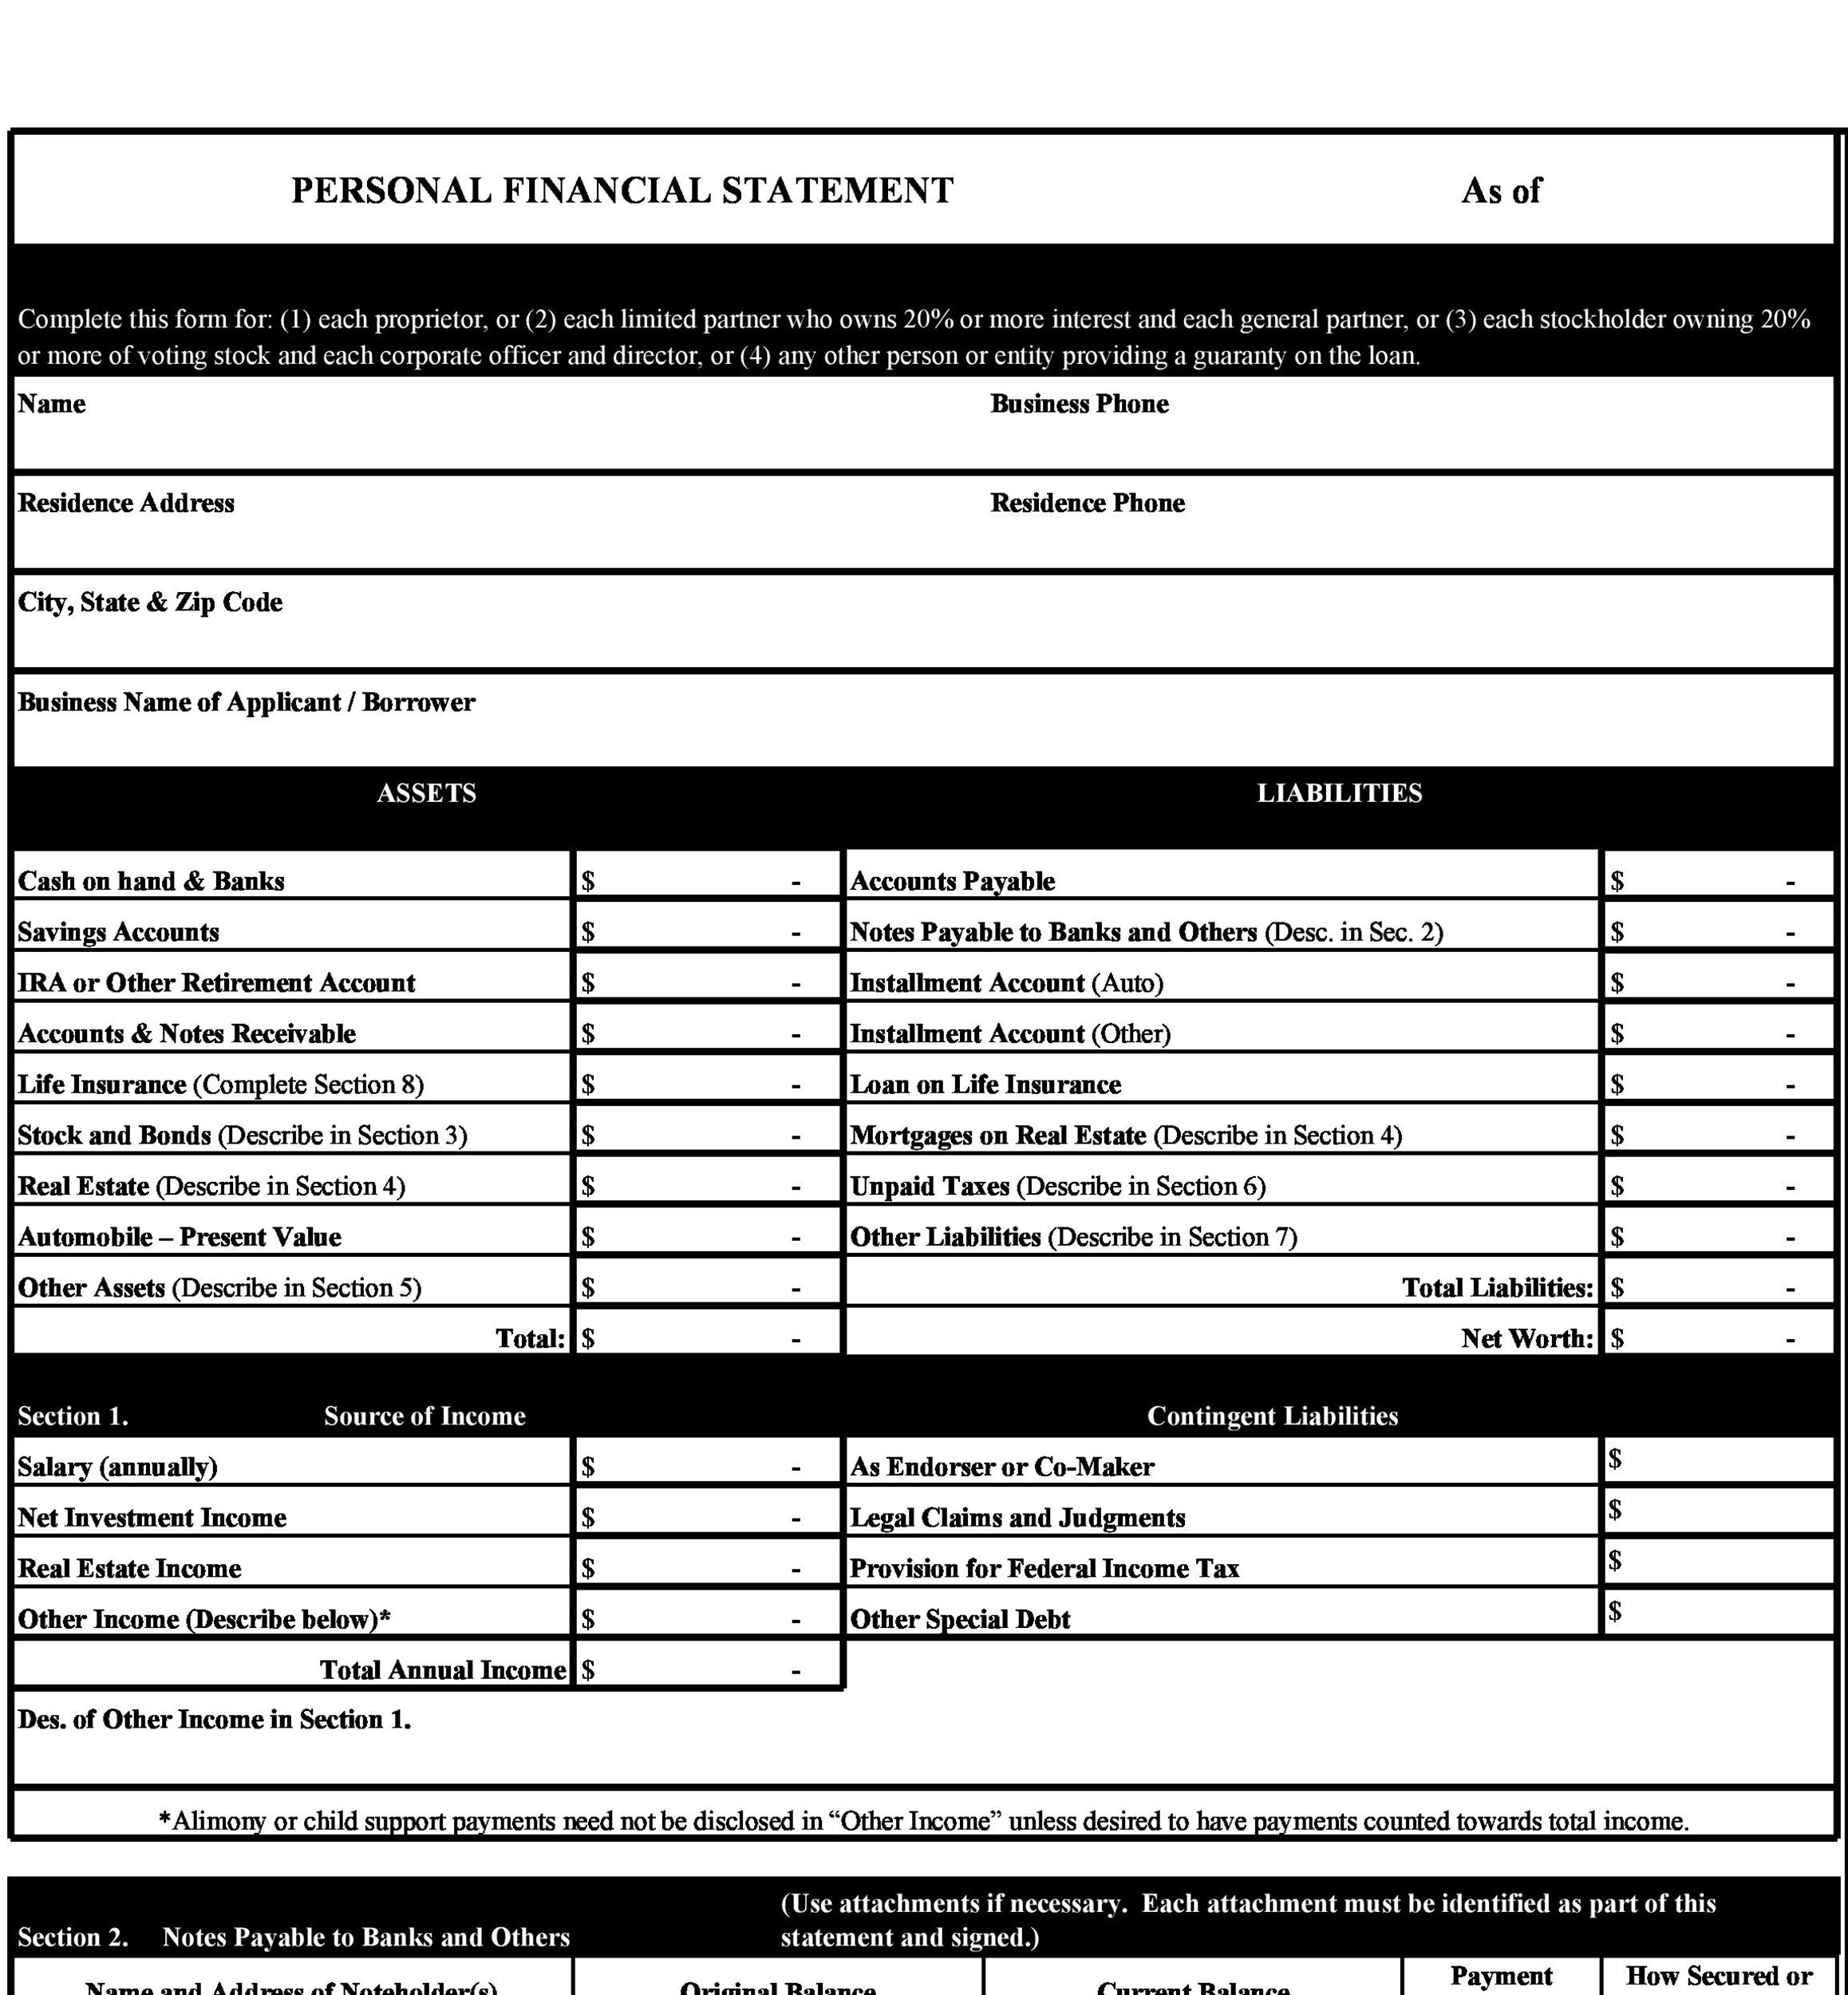 40 Personal Financial Statement Templates Forms TemplateLab